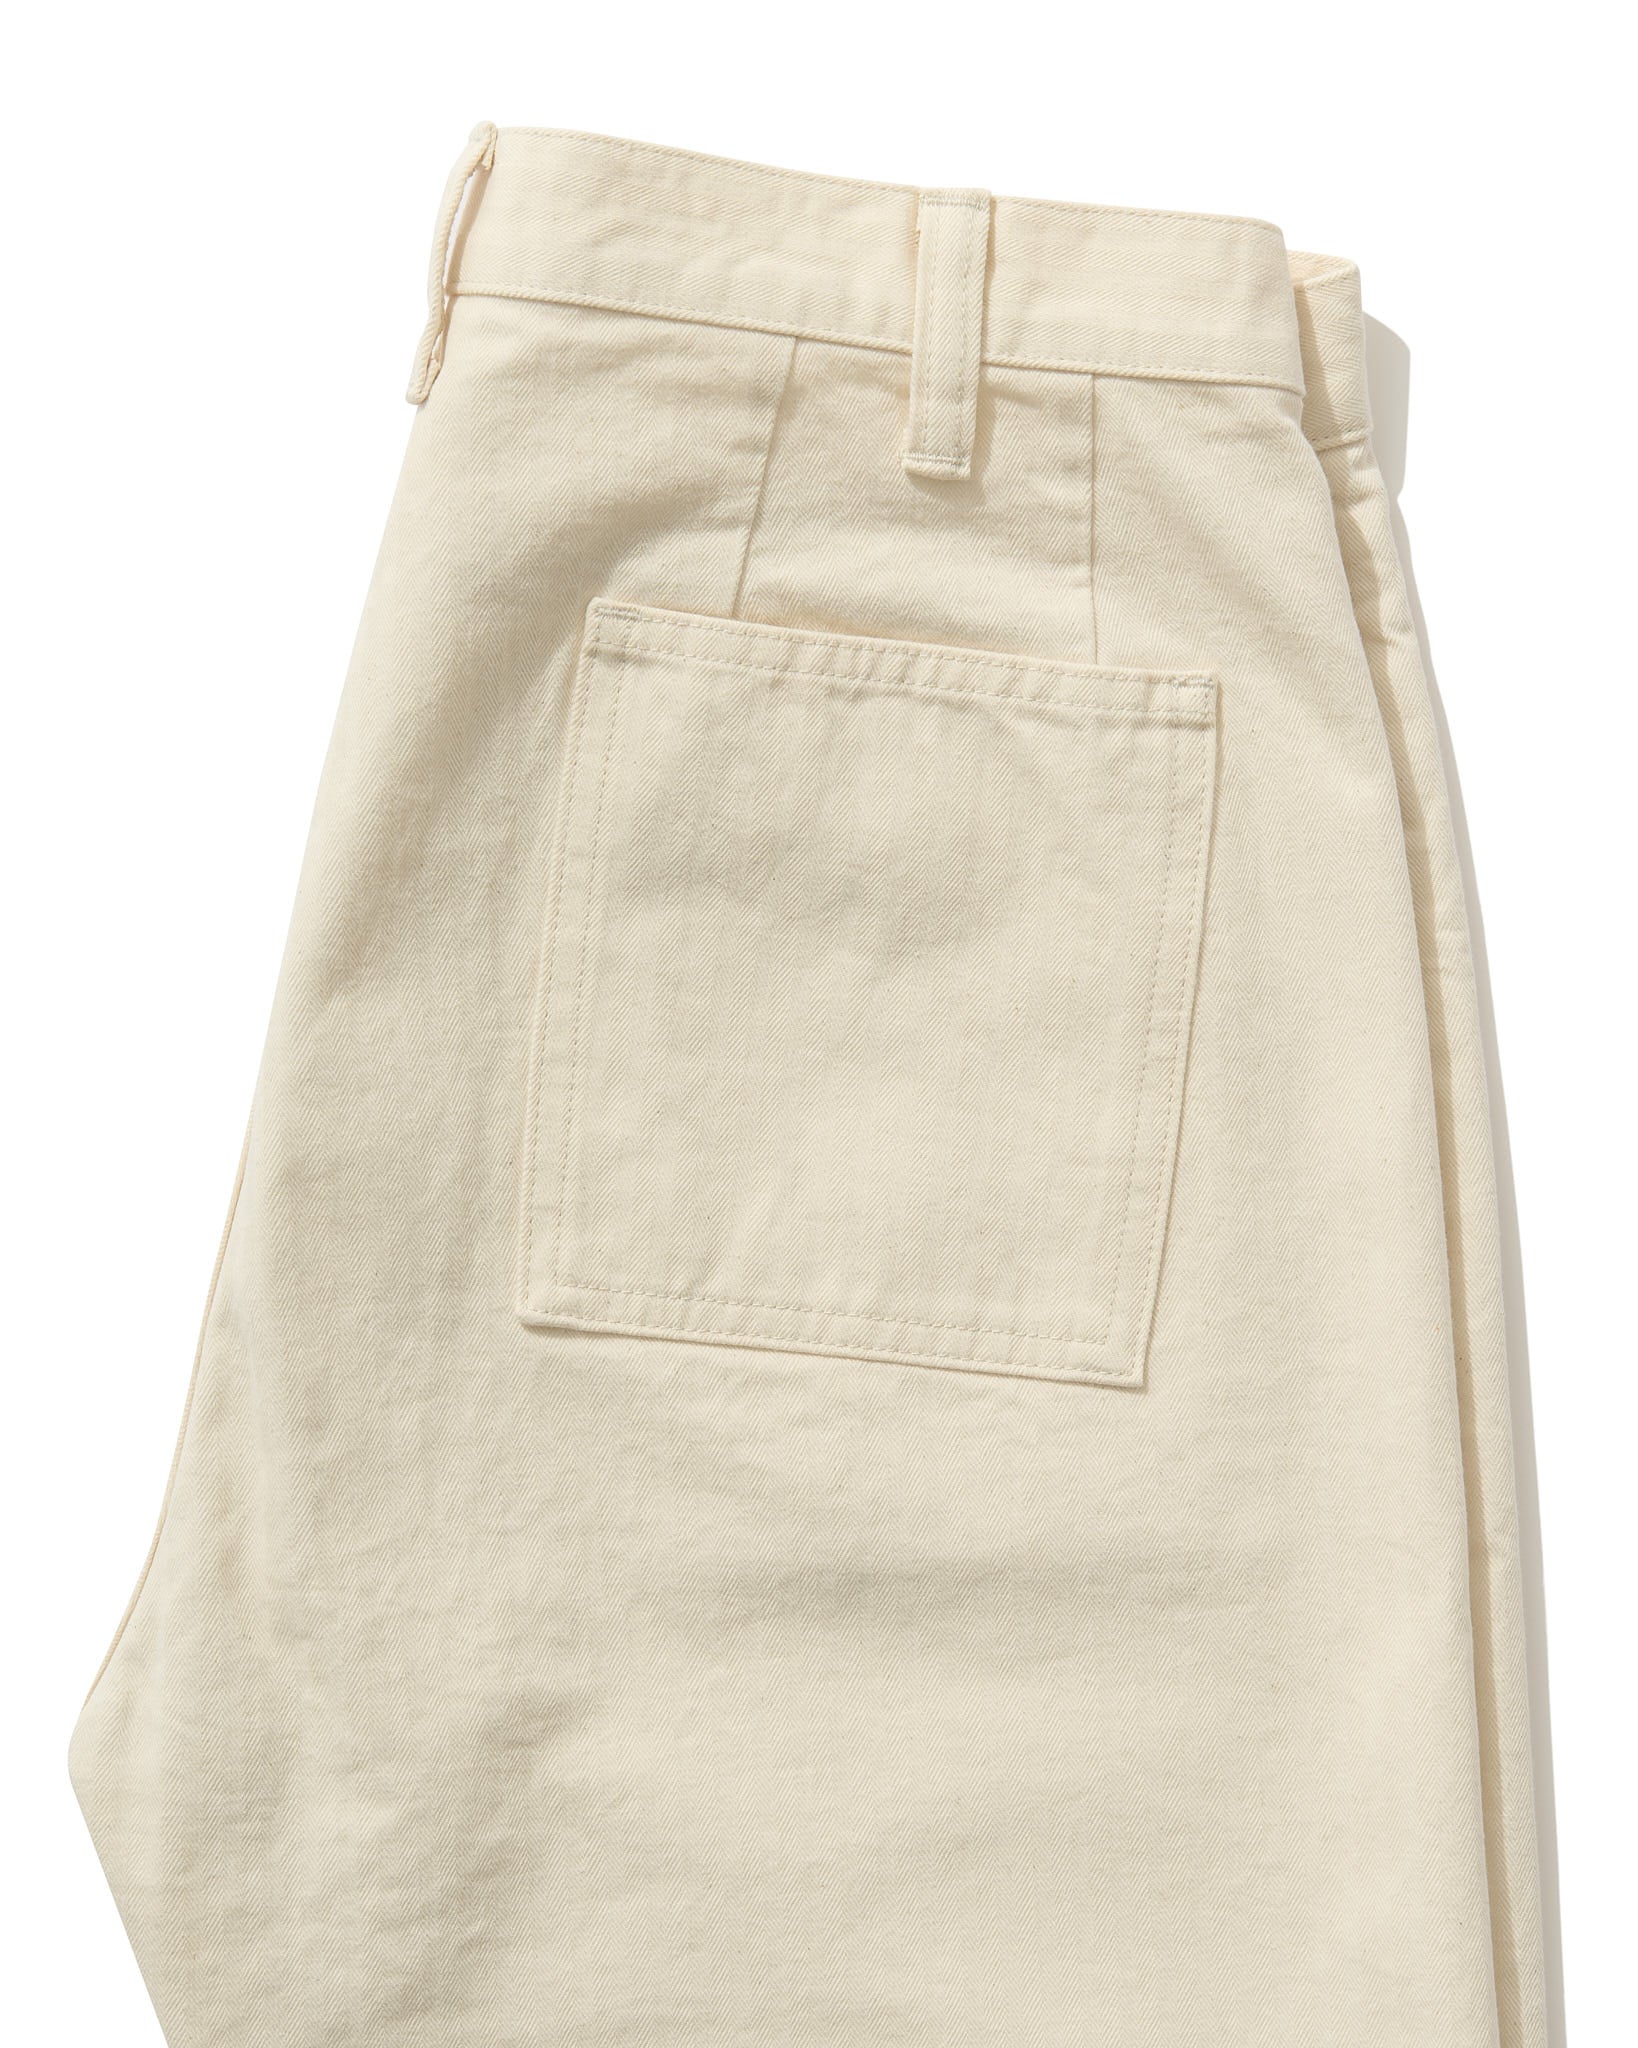 French Pocket Trouser in Cream HBT